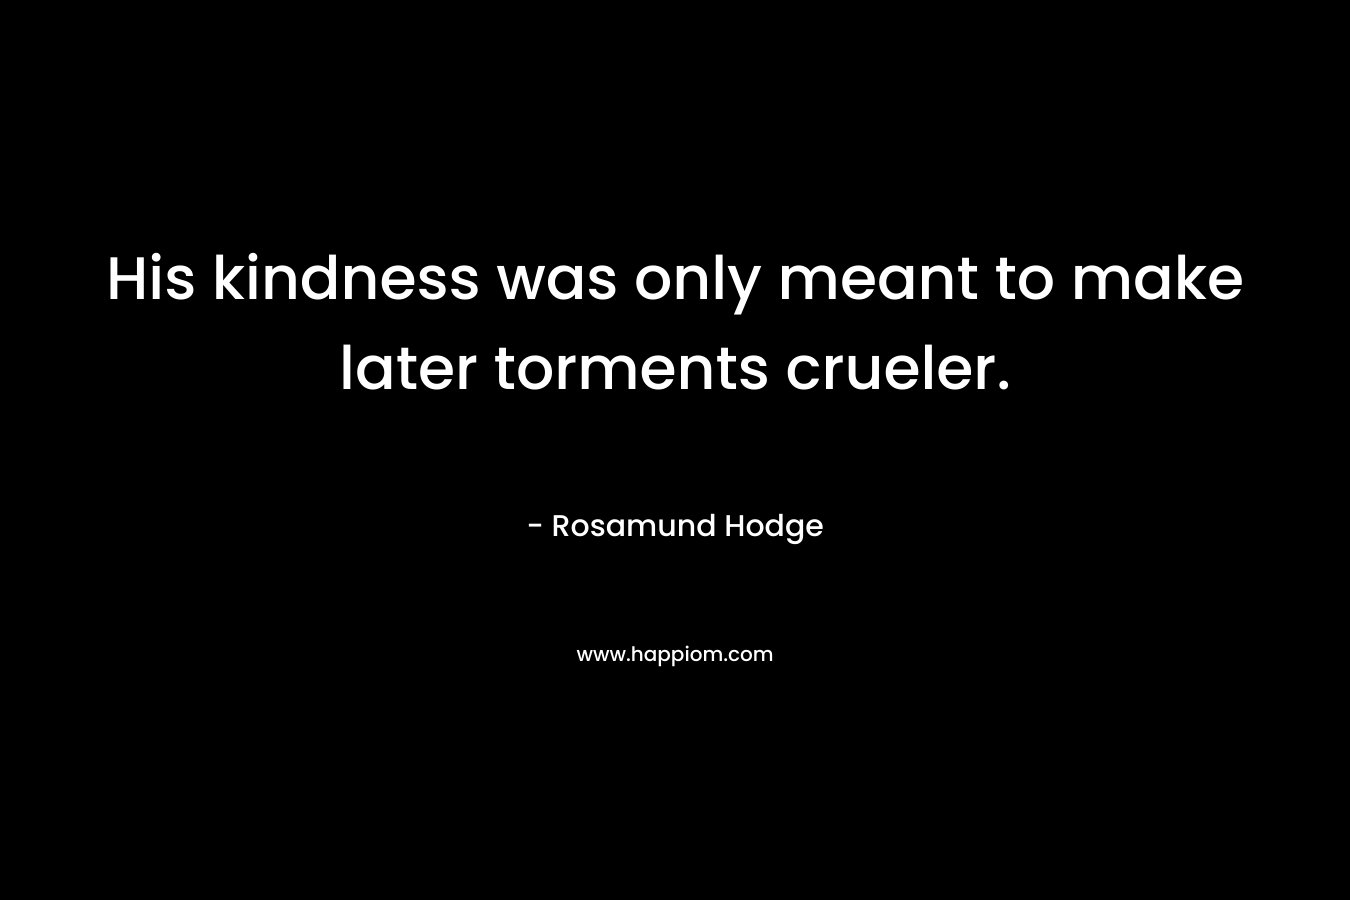 His kindness was only meant to make later torments crueler.